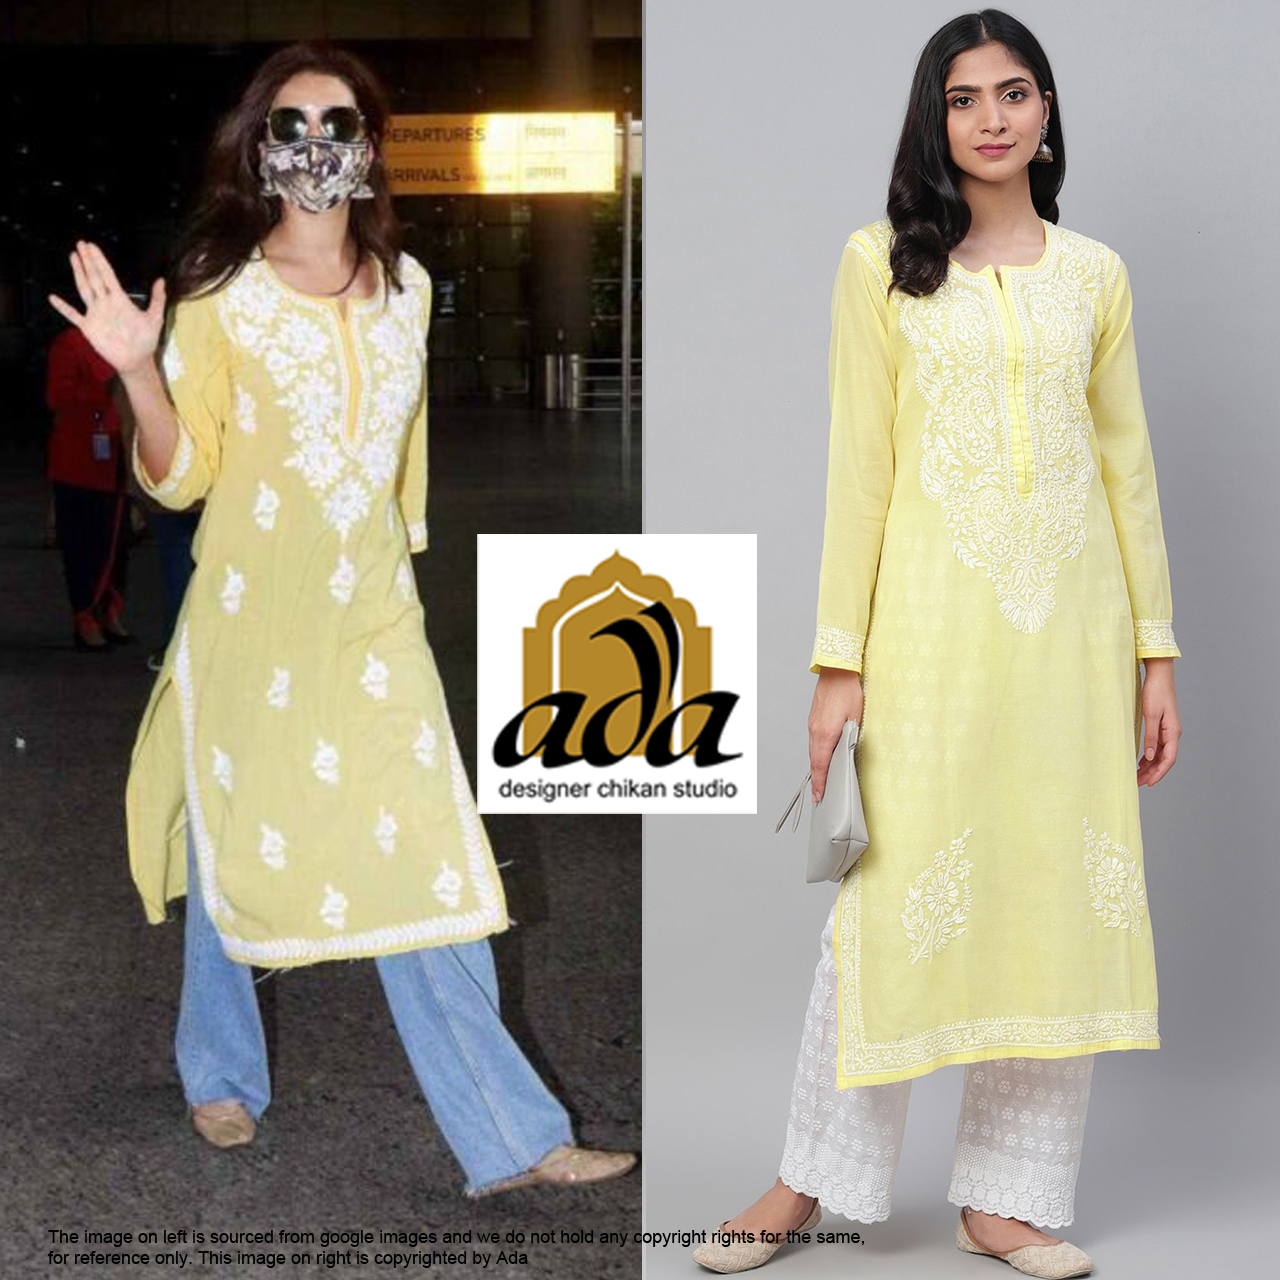 In this image we see Actress Karishma Tanna from the show Kyunki Saas Bhi Kabhi Bahu Thi stepping out in the middle of the pandemic in a pale yellow chikankari kurta with jeans which you can shop from WWW.ADACHIKAN.COM